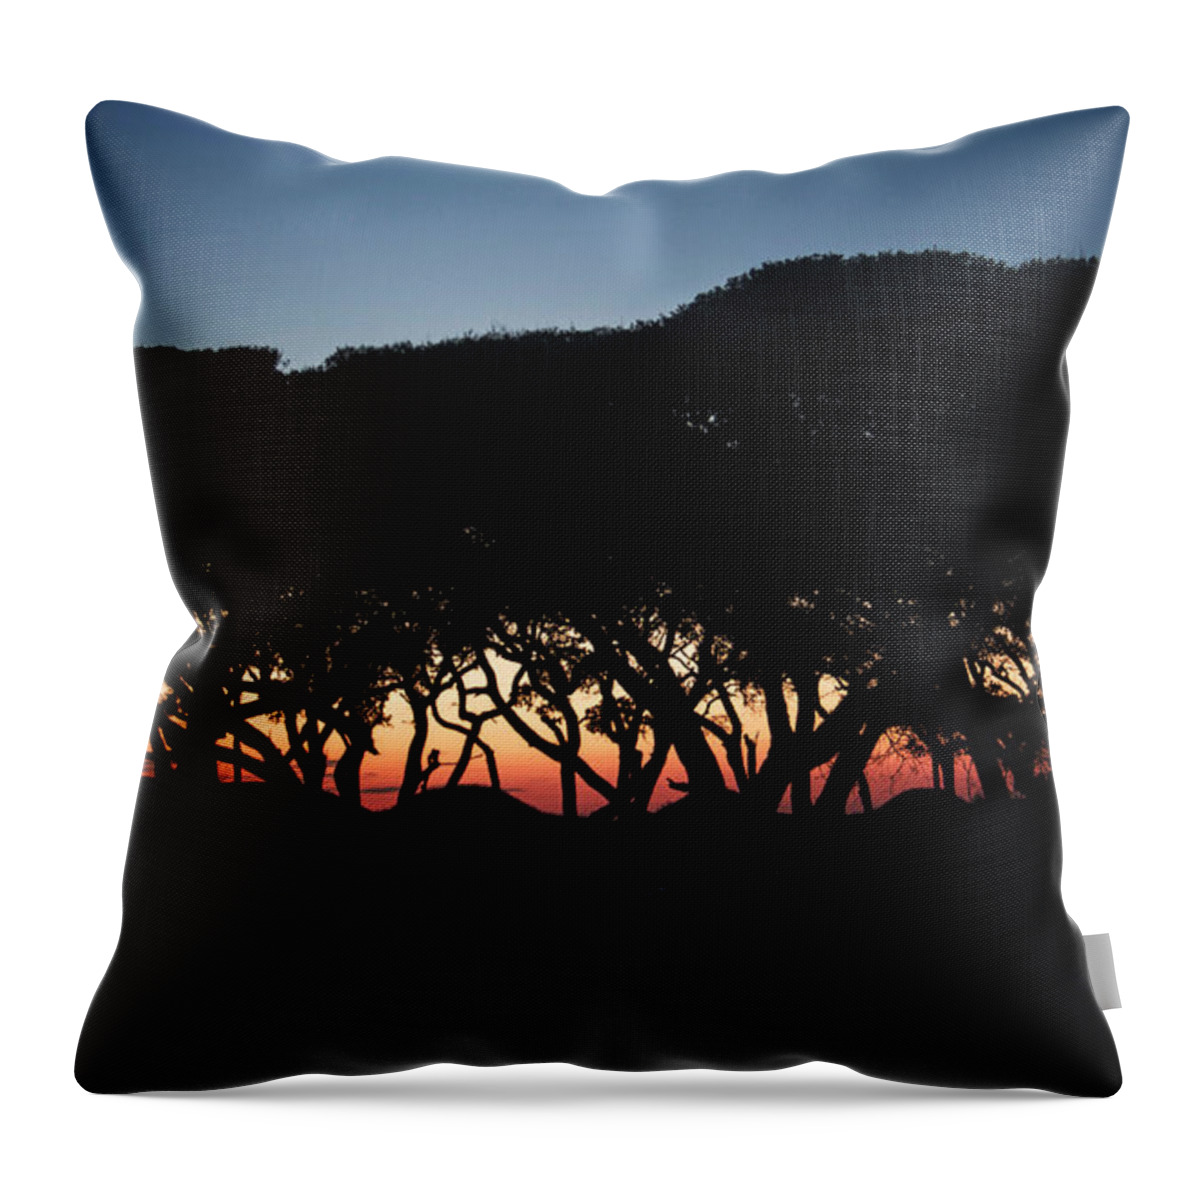 Fort Fisher Sunset Scene Throw Pillow featuring the digital art Oh Those Trees by Phil Mancuso